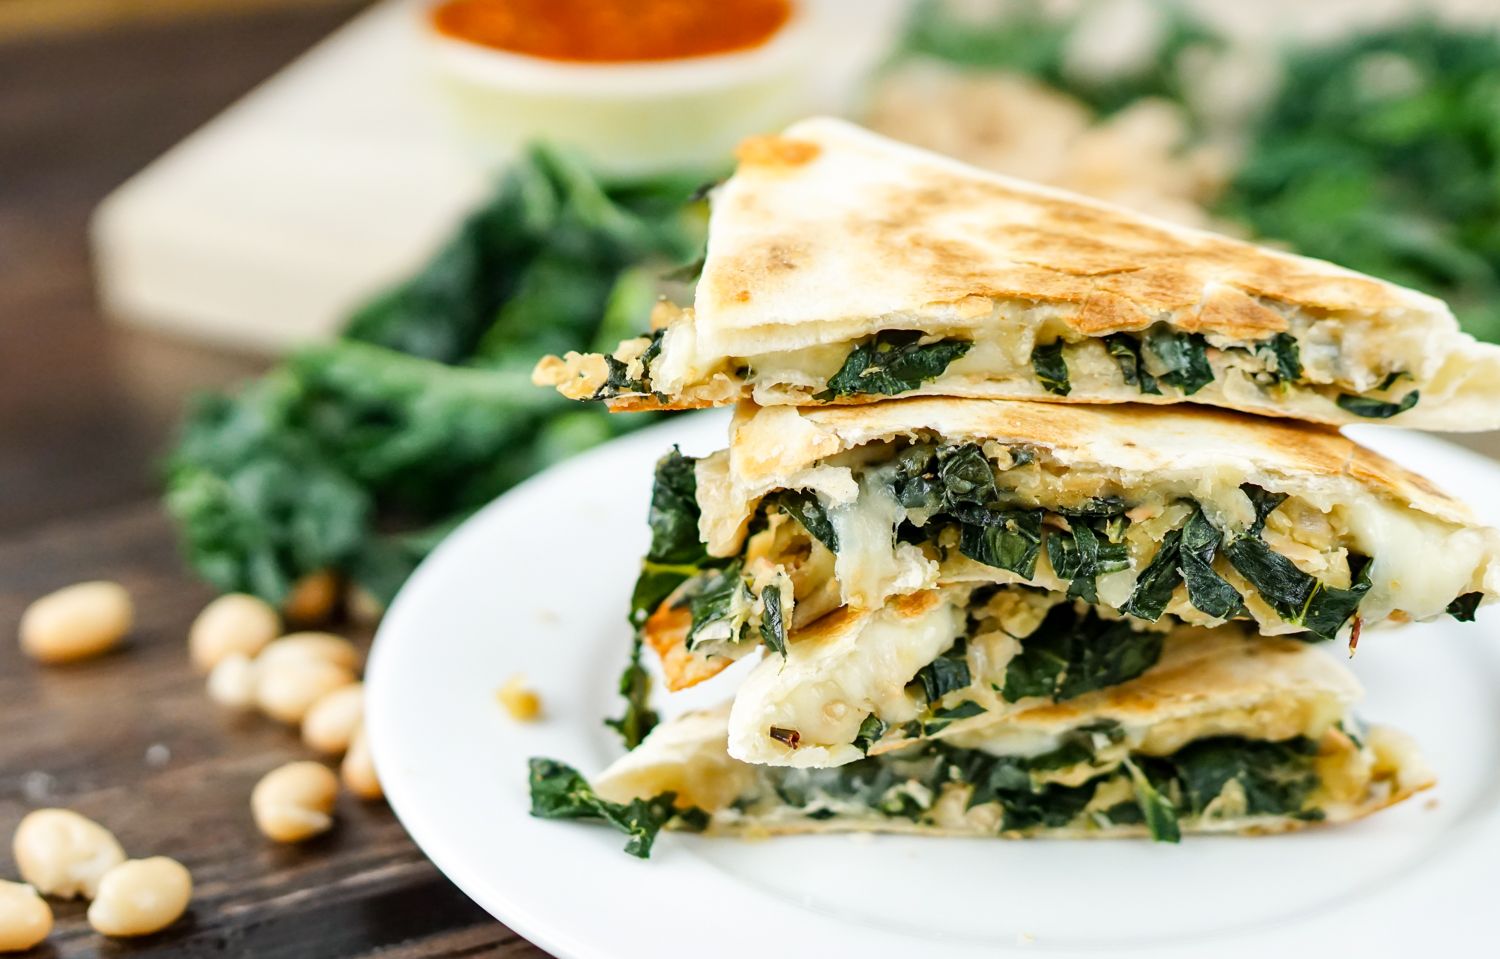 Kale and white bean quesadillas stacked in a pile with kale on the side.